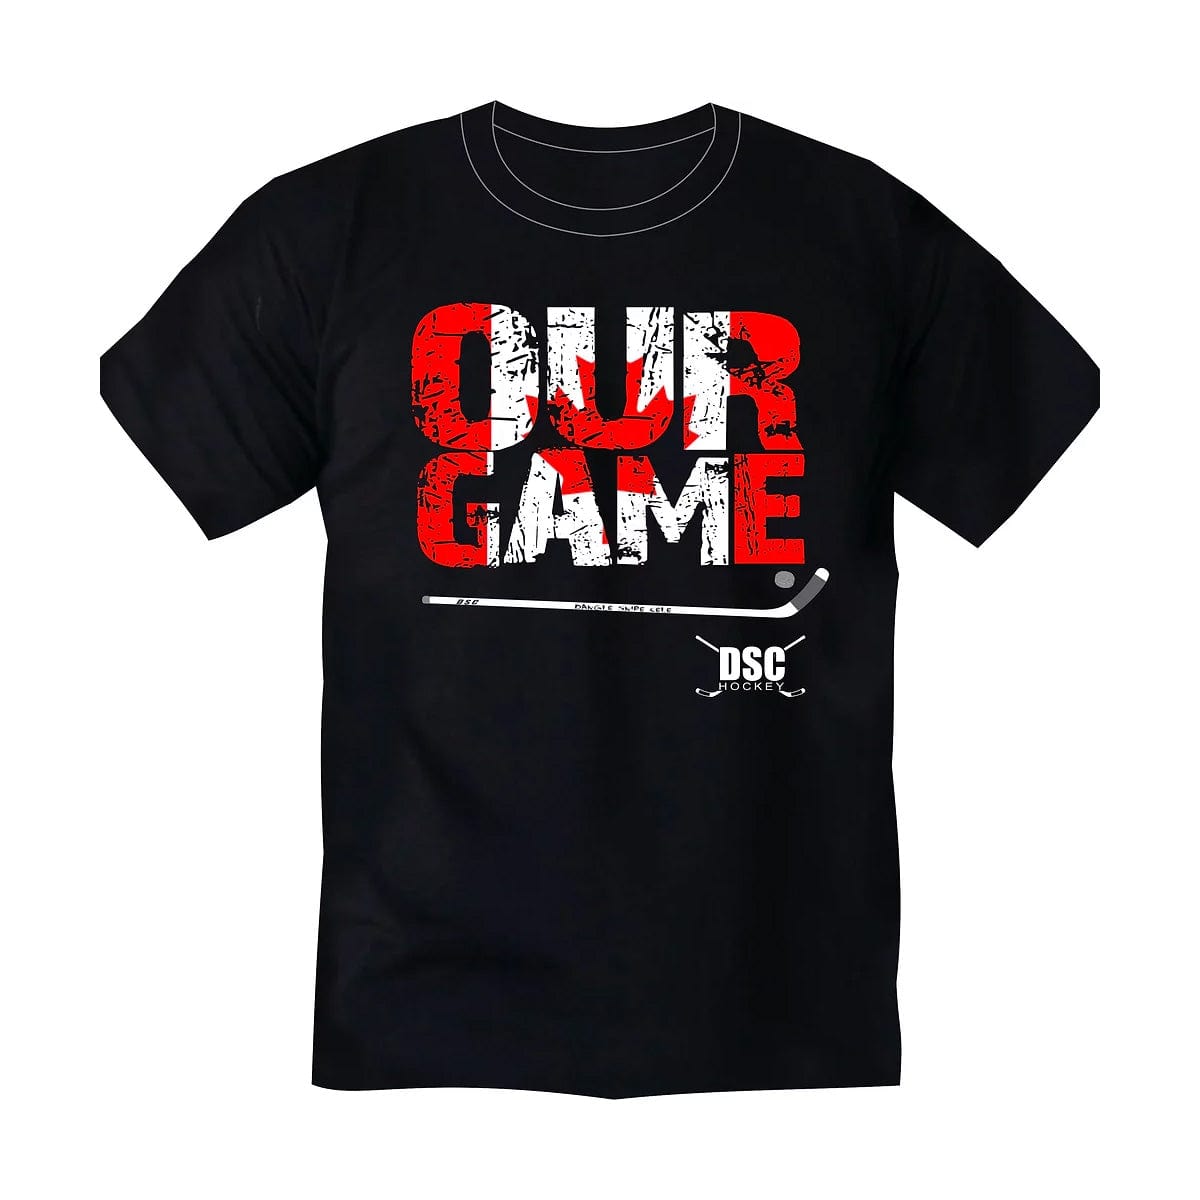 DSC Hockey Our Game Men's Shirt - The Hockey Shop Source For Sports